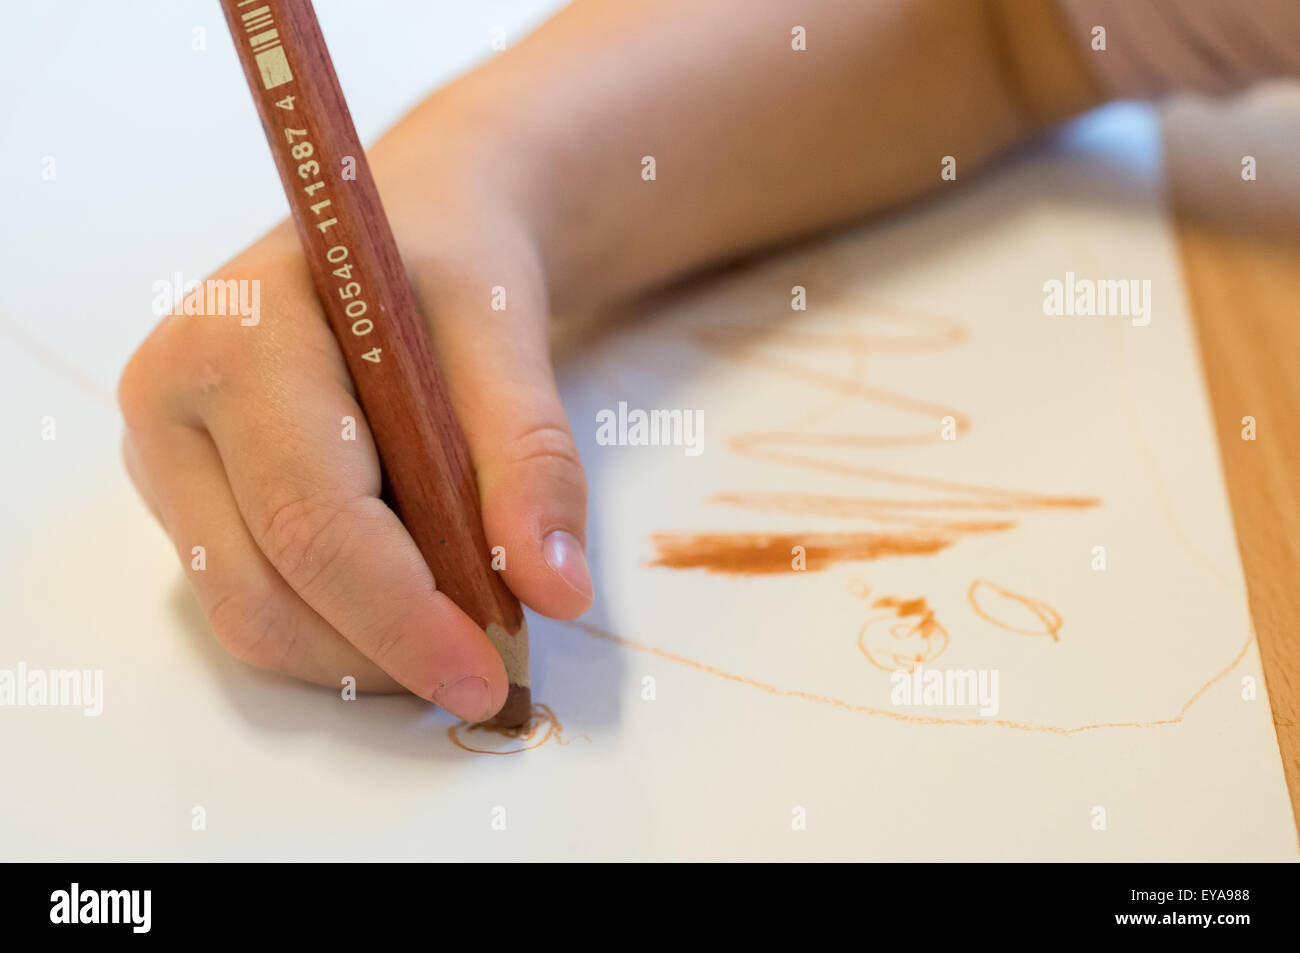 Berlin, Germany, painting a child's hand in Kita Stock Photo